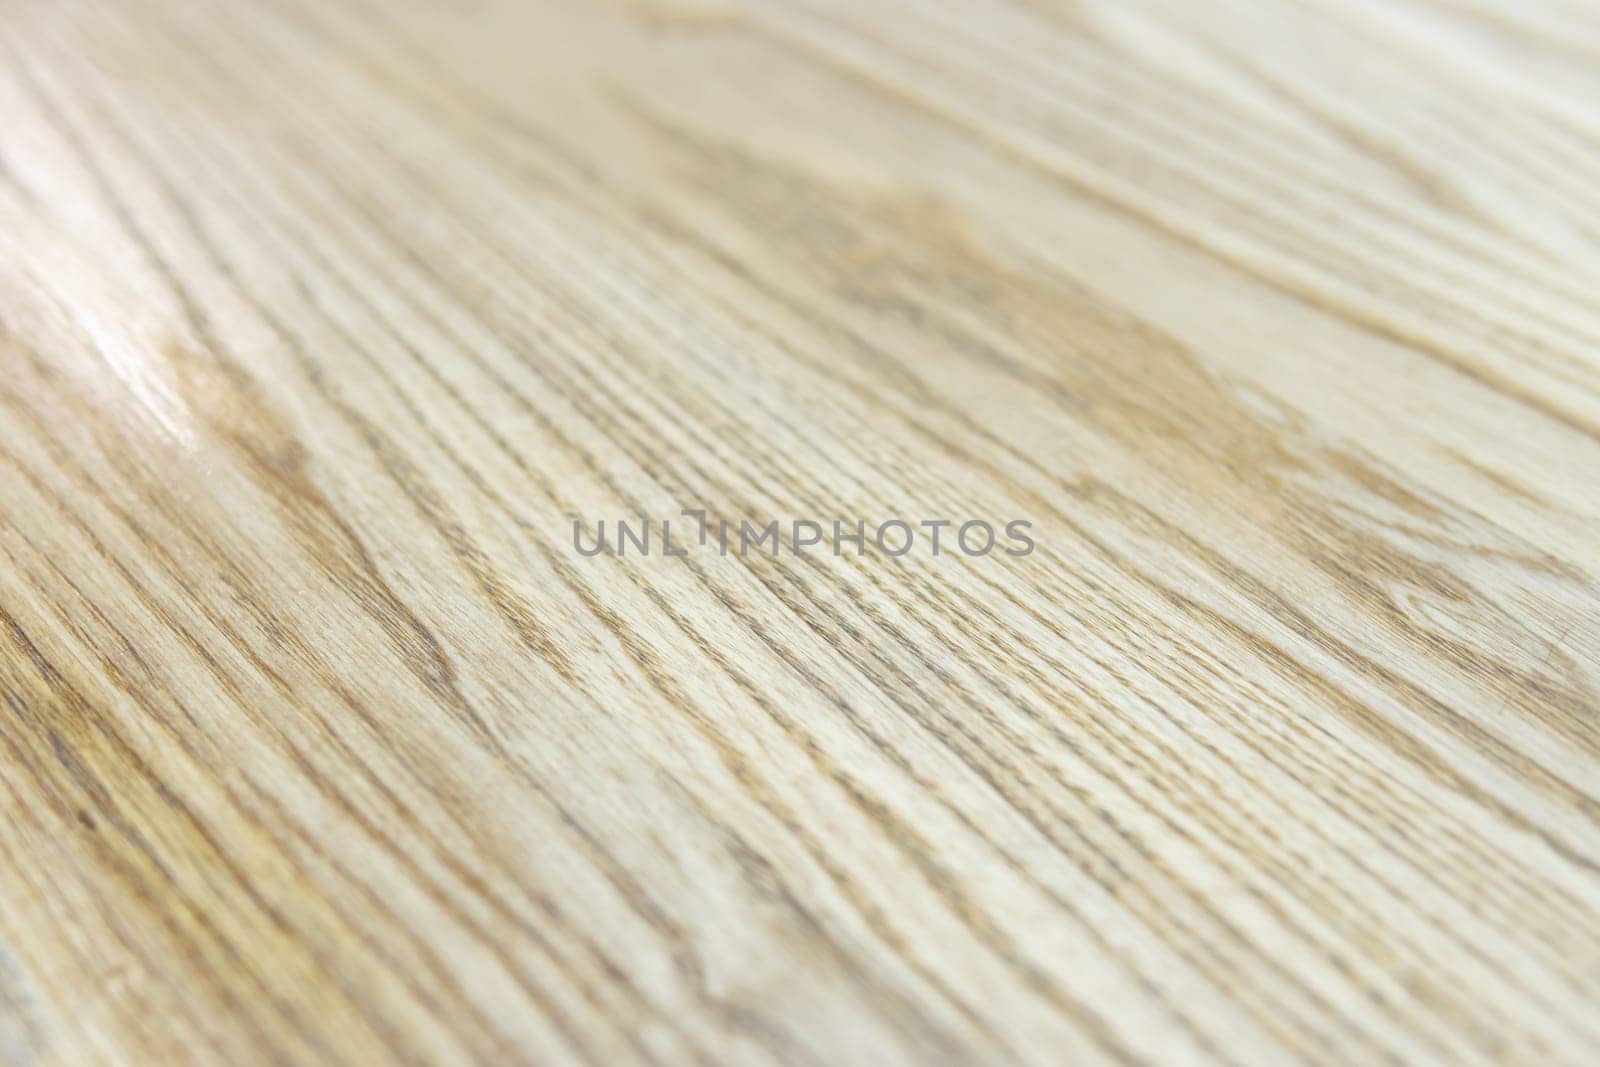 Wood texture background, wooden board in brown color. Grunge wood plank, painted wood wall paintings. High quality photo